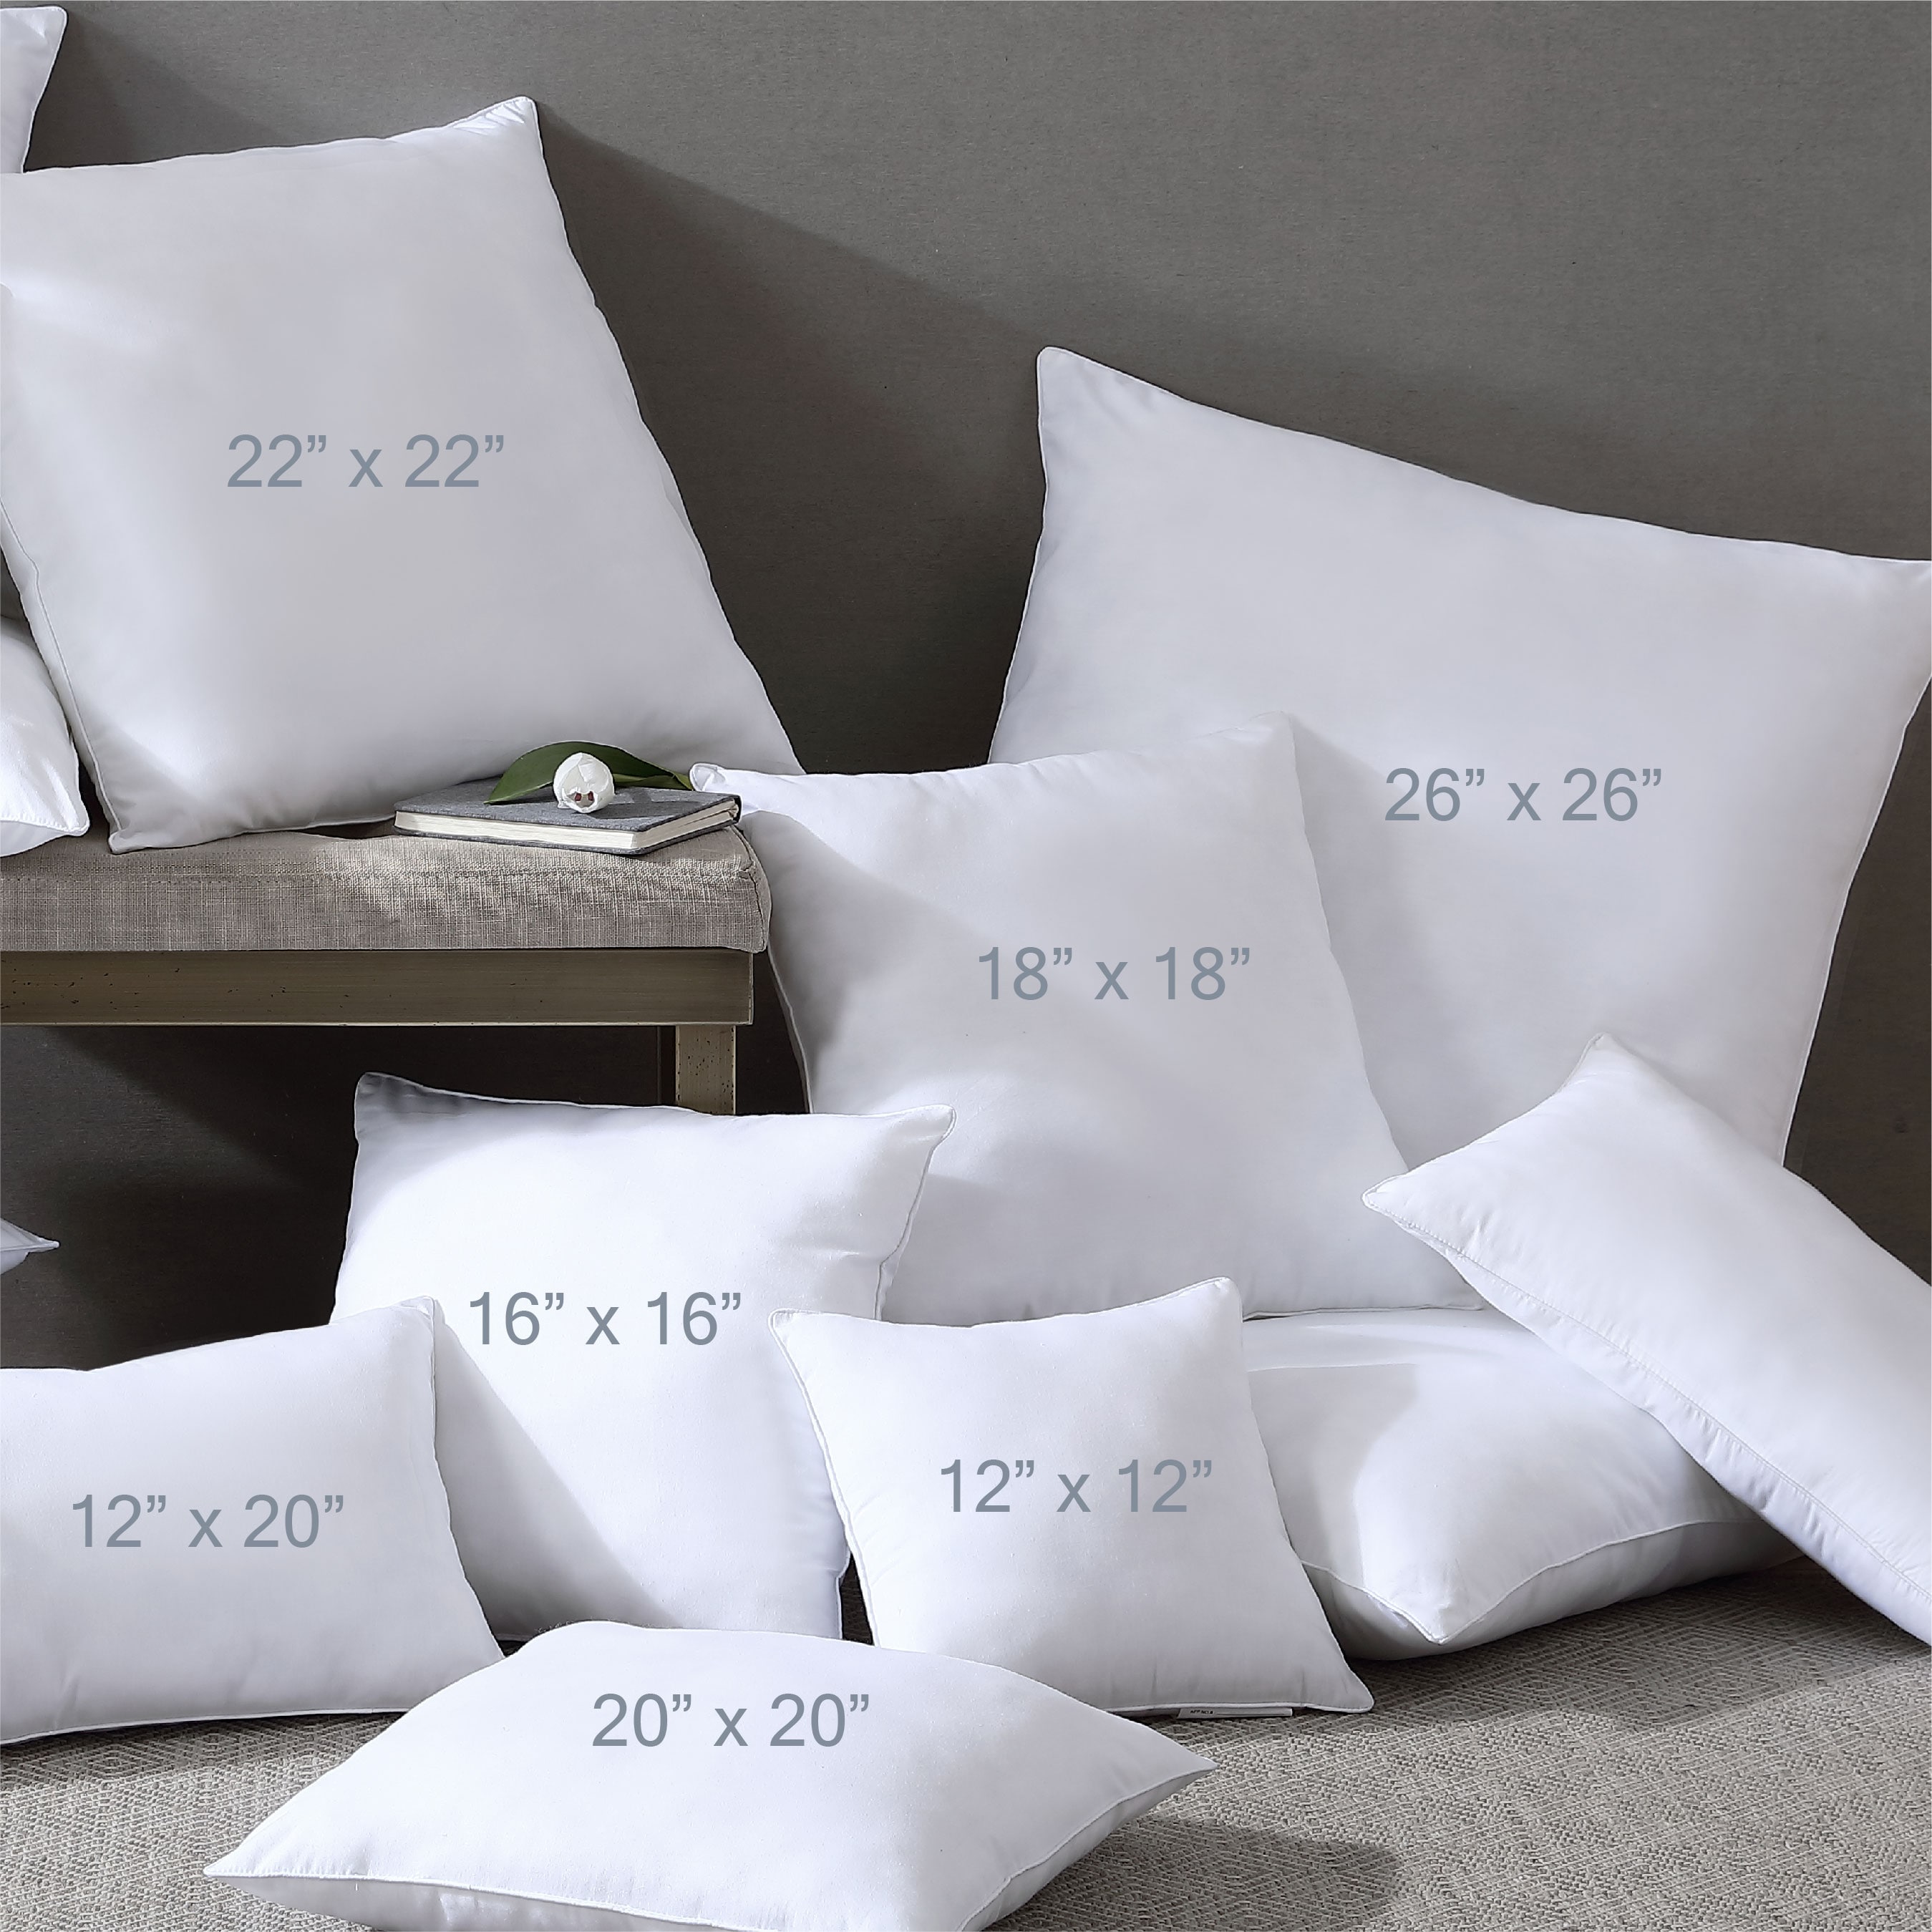 Swift Home Ultra Soft Versatile Cotton Blend Pillow Insert 2-Pack, 20"x20" Square Polyester in White | SHPW2-001-2020